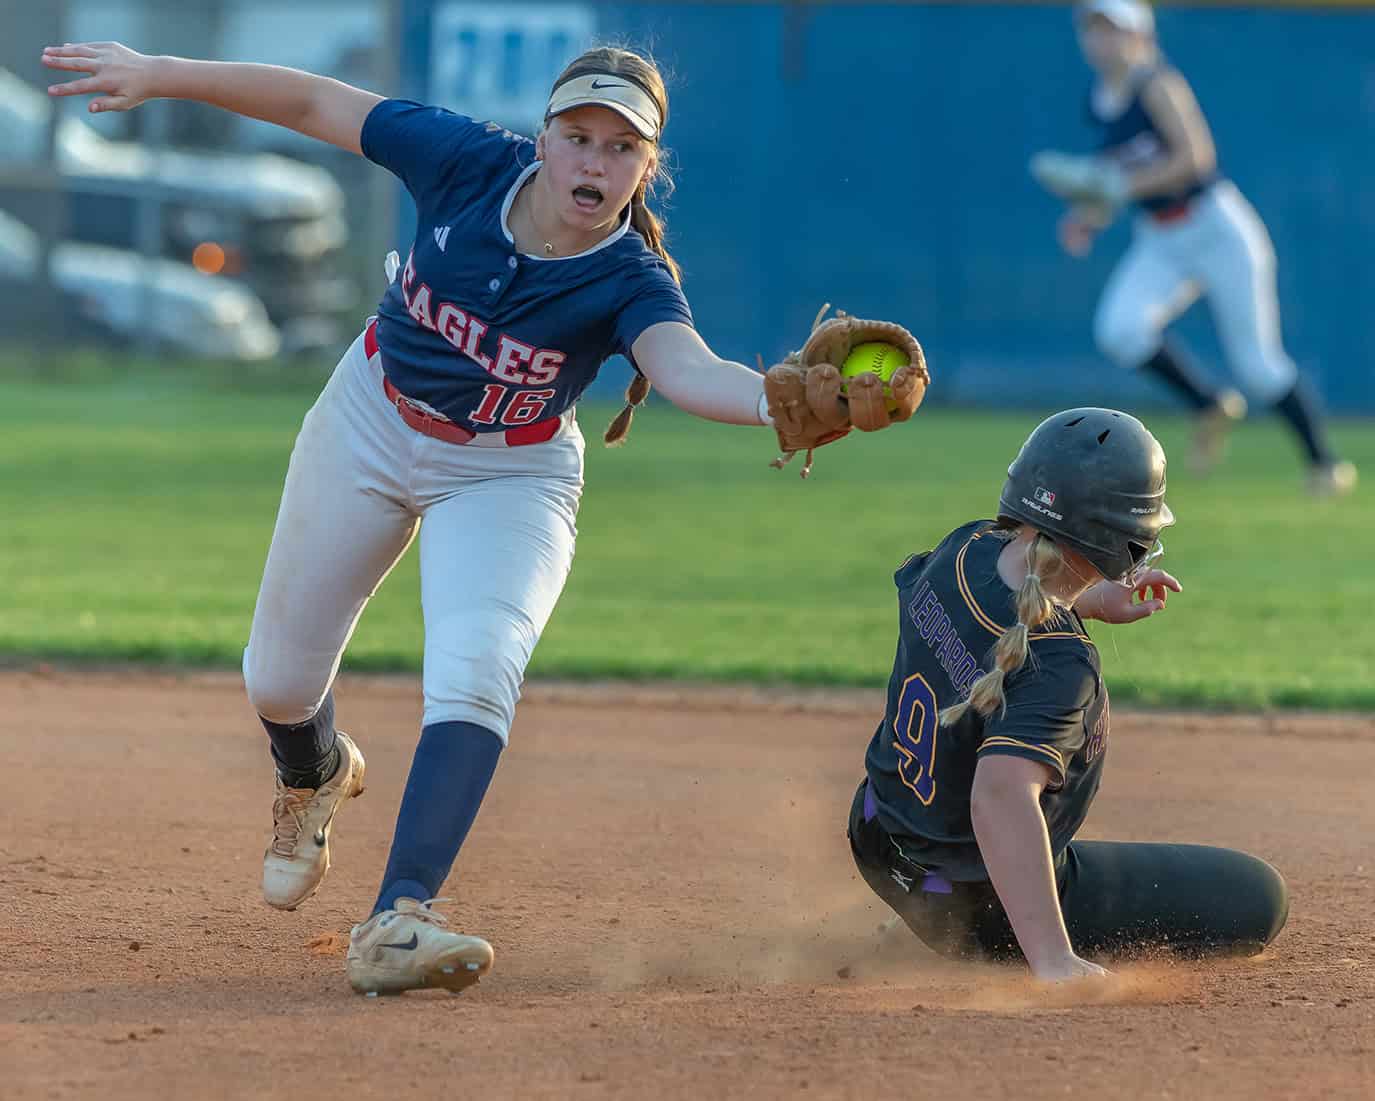 Springstead High’s, 16, shortstop Alexis Adelman snares a late and wide throw as Hernando High’s, 9, Murphy Blade slides into second base Tuesday evening at Springstead High. [Photo by Joe DiCristofalo]